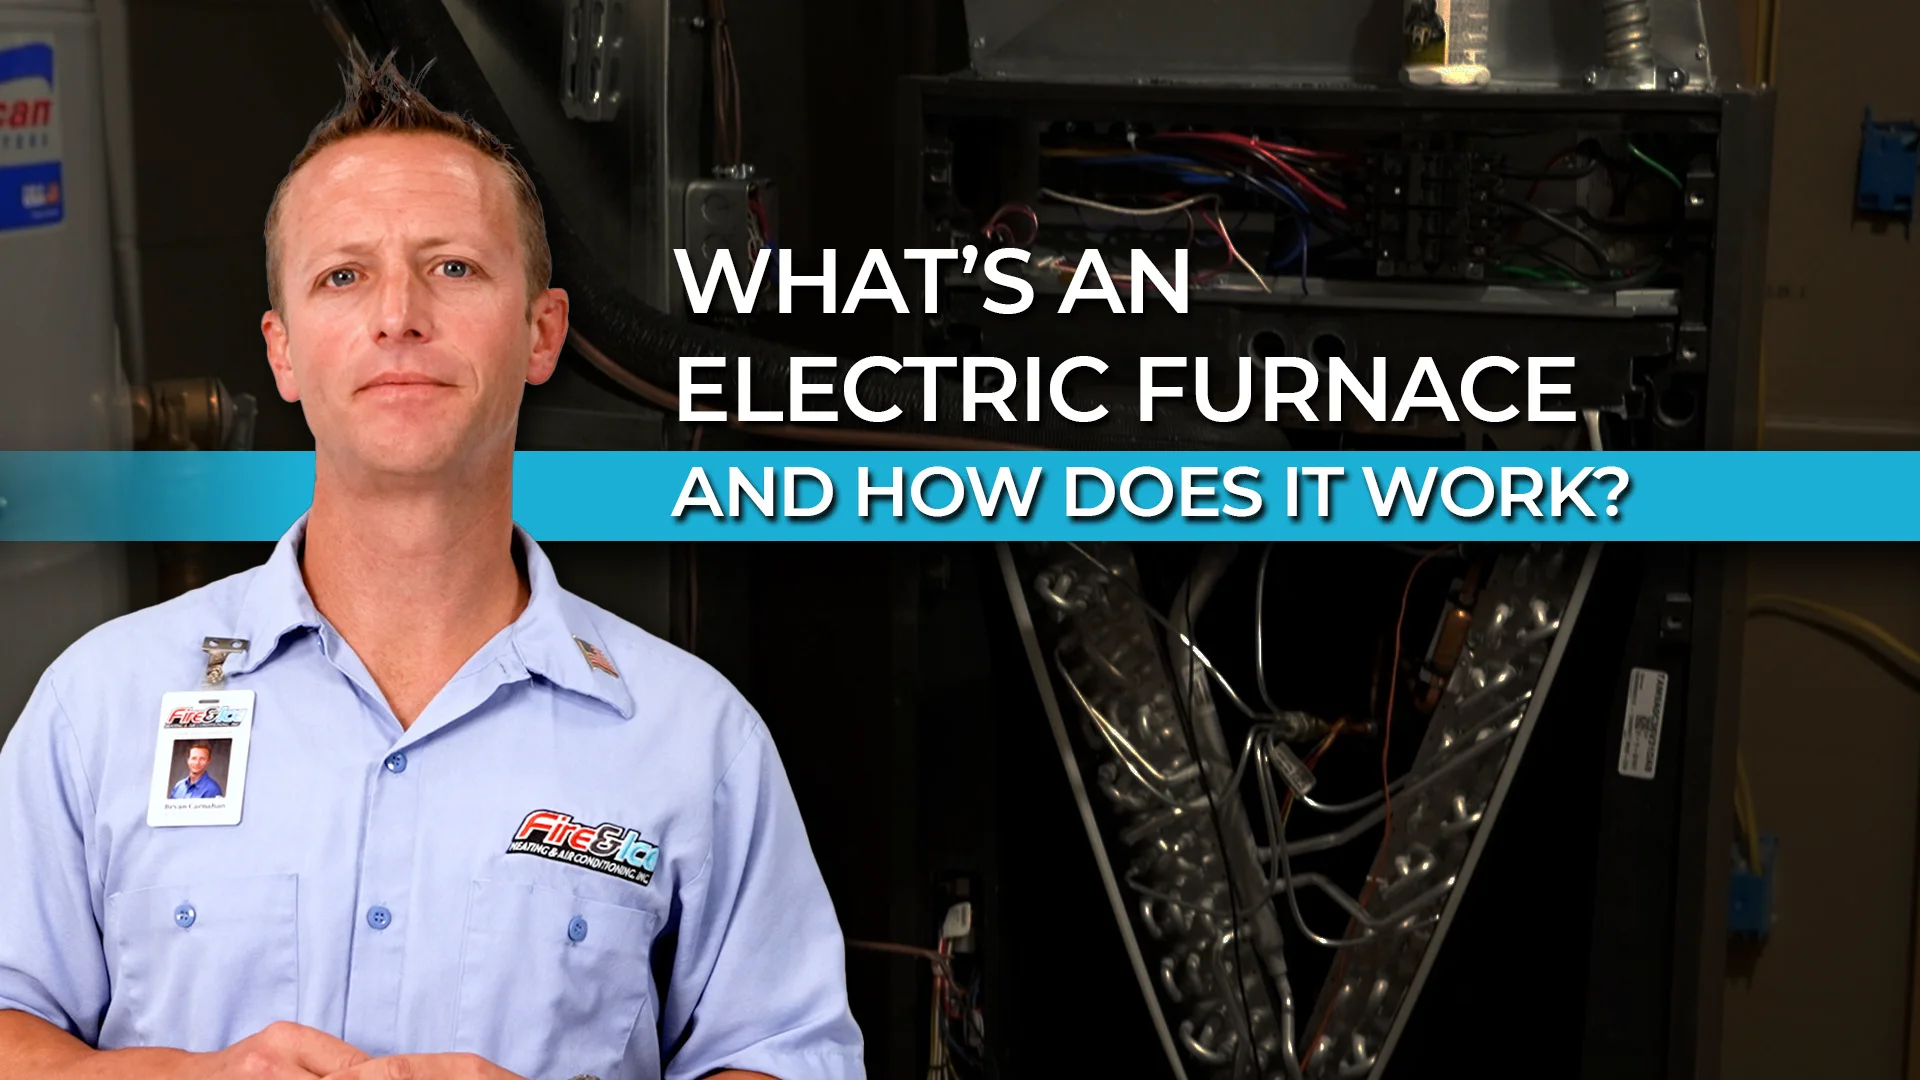 What is an electric furnace and how does it work? on Vimeo